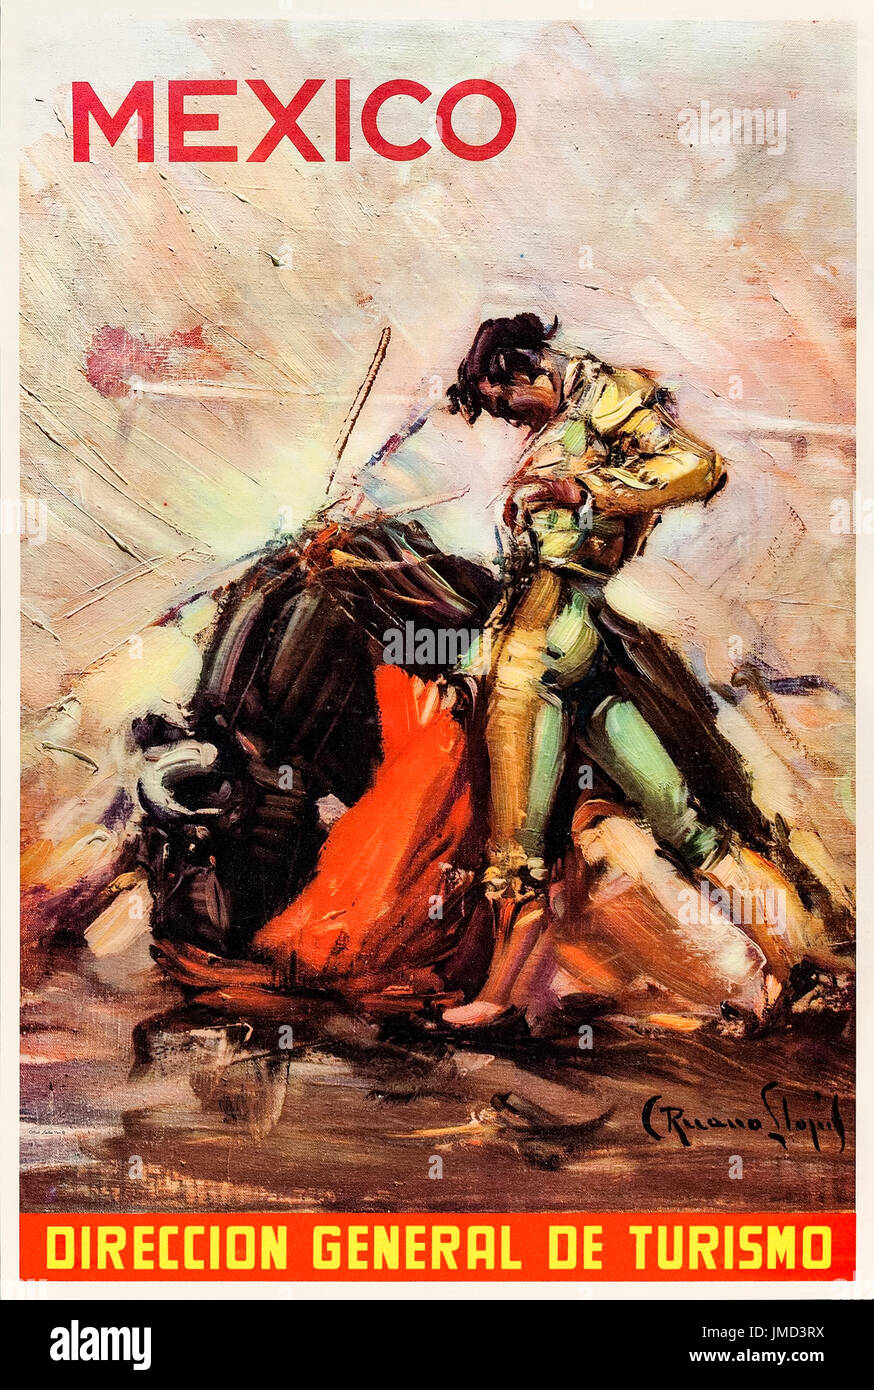 ‘Mexico – Direccion General de Turismo’ Tourism Poster released circa 1959 by the Mexican Secretary of Tourism featuring a painting of a Matador and bull by Spanish artist Carlos Ruano Llopis (1879-1950). Stock Photo